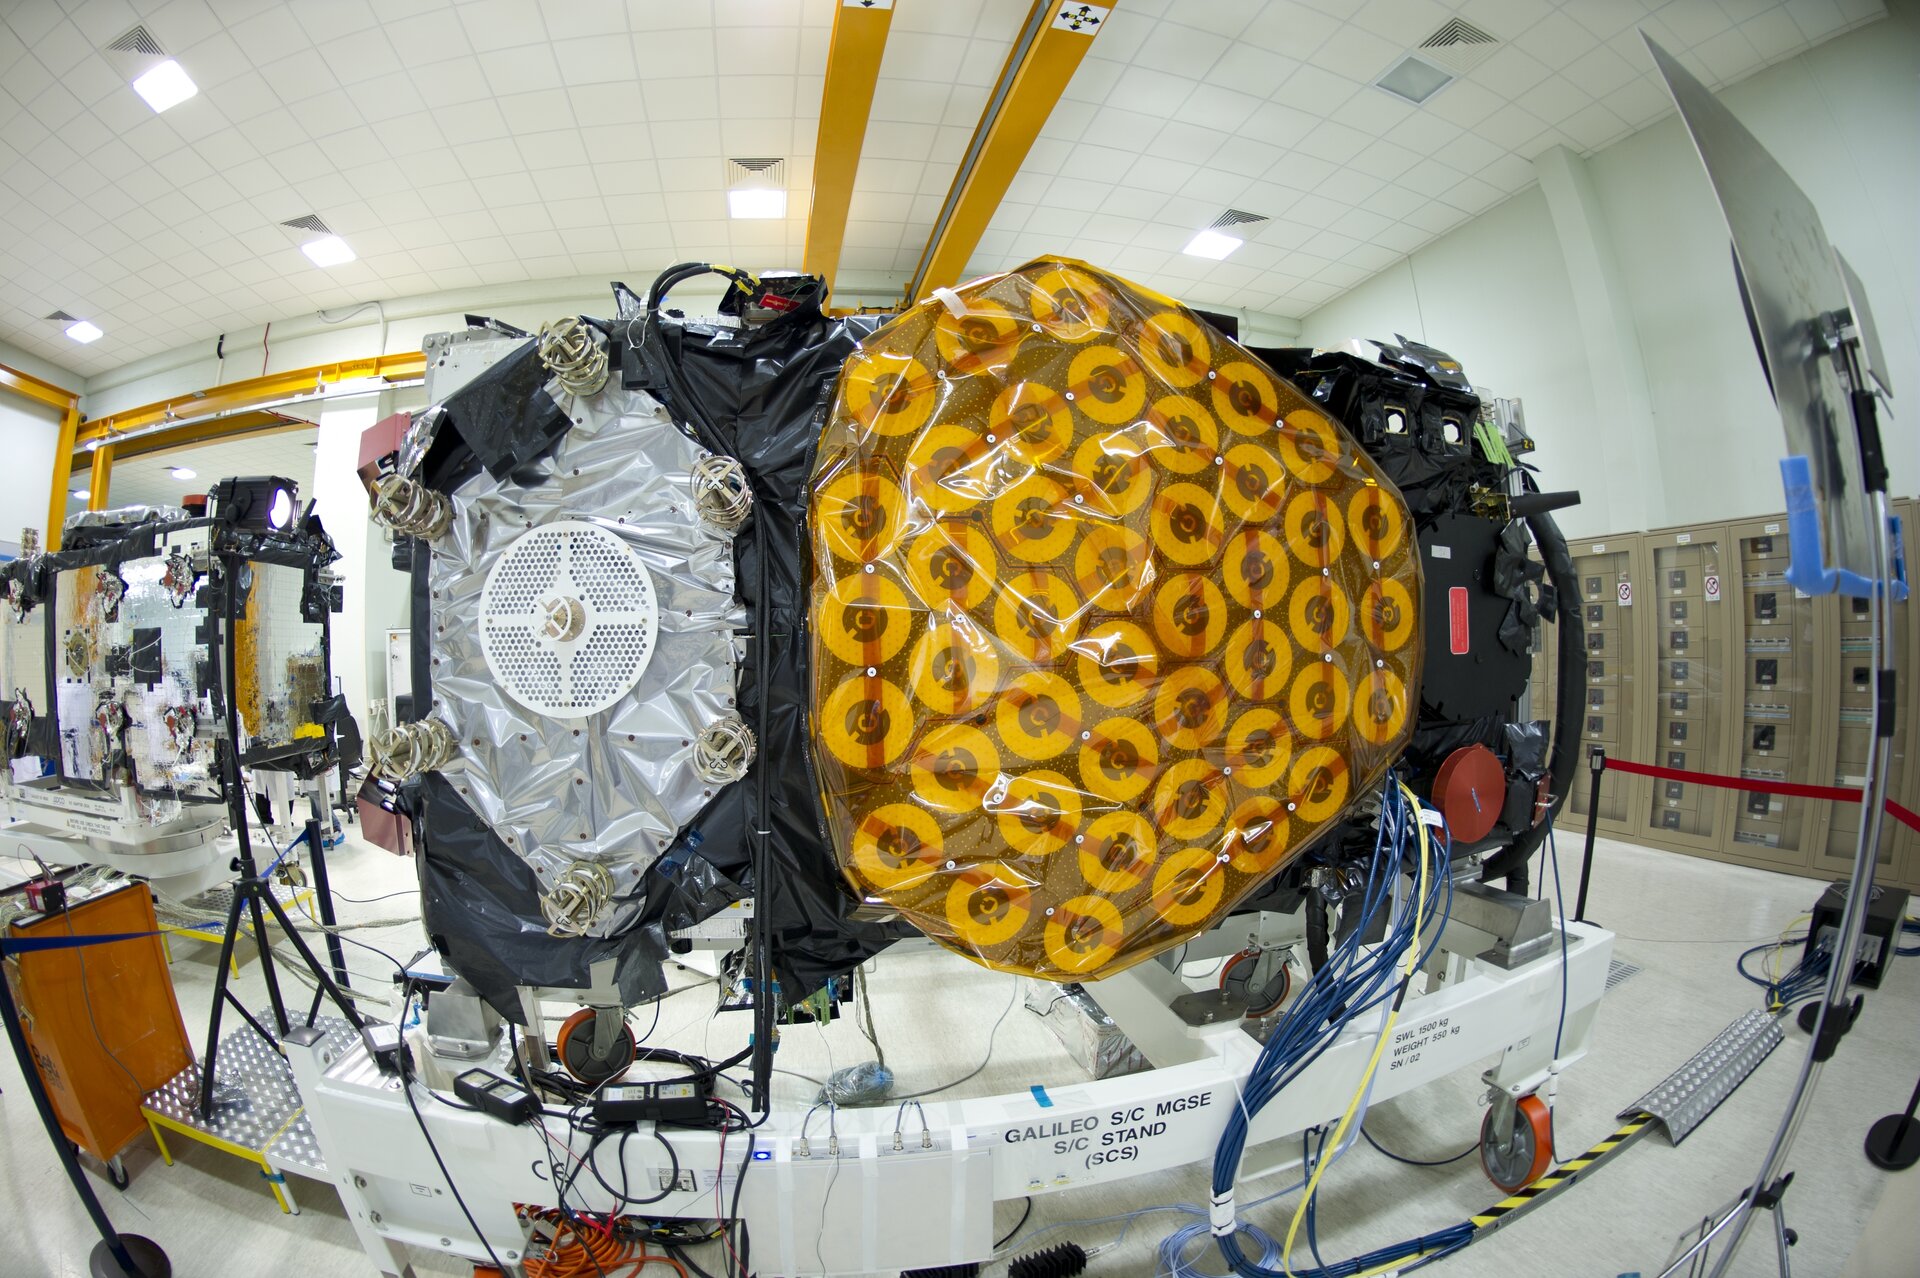 IOV assembled and tested by Thales Alenia Space